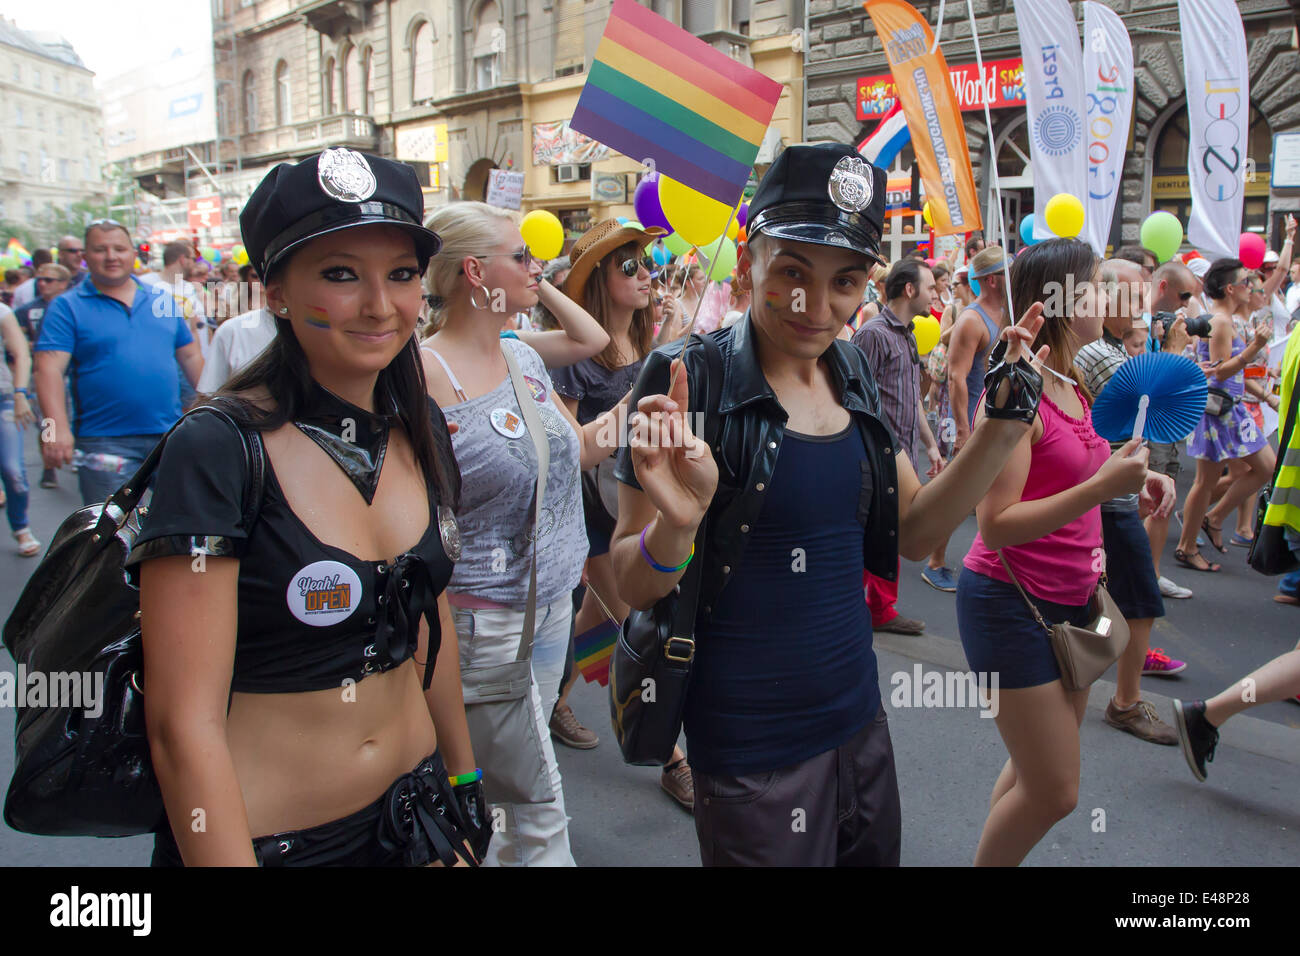 budapest-hungary-5th-july-2014-participants-of-the-gay-pride-parade-E48P28.jpg